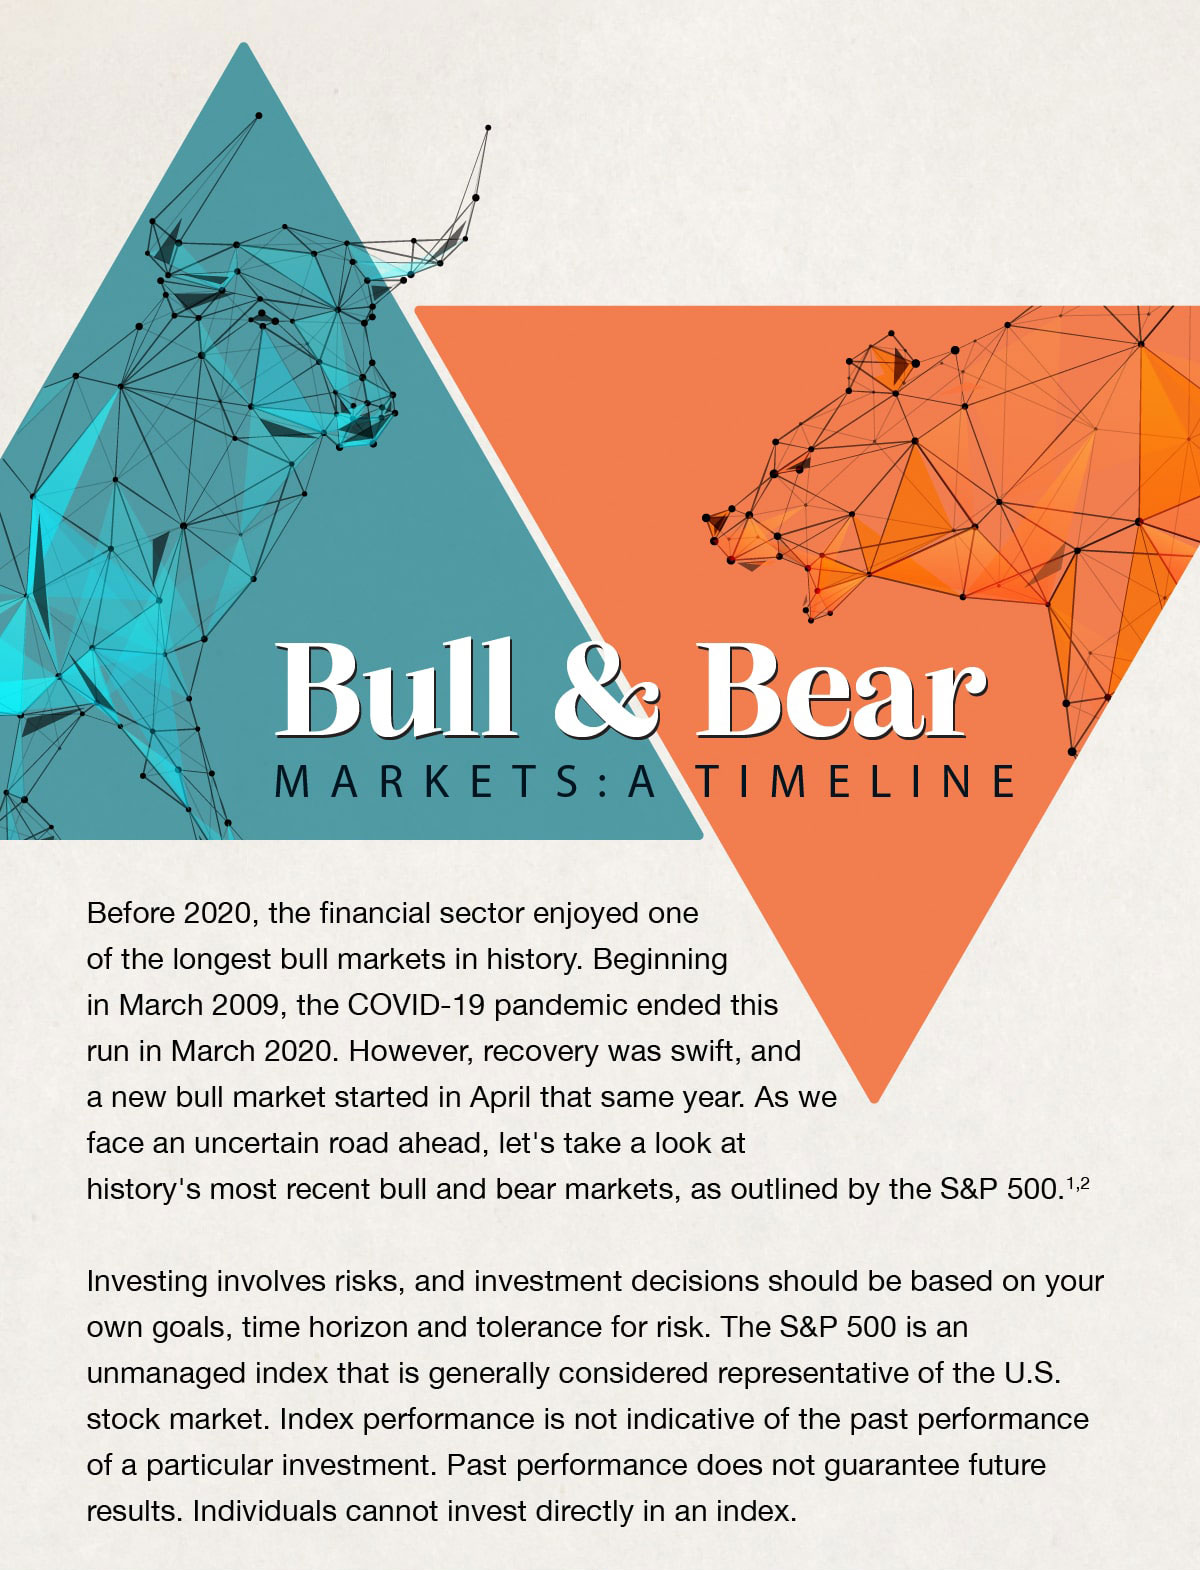 Bull & Bear Markets: A Timeline. Before 2020, the financial sector enjoyed one of the longest bull markets in history. Beginning in March 2009, the covid 19 pandemic ended this run in March 2020. However, recovery was swift, and a new bull market started in April that same year. As we face an uncertain road ahead, let's take a look at history's most recent bull and bear markets, as outlined by the S&P 500. Sources 1 and 2. Investing involves risks, and investment decisions should be based on your own goals, time horizon and tolerance for risk. The S&P 500 is an unmanaged index that is generally considered representative of the U.S. stock market. Index performance is not indicative of the past performance of a particular investment. Past performance does not guarantee future results. Individuals cannot invest directly in an index.